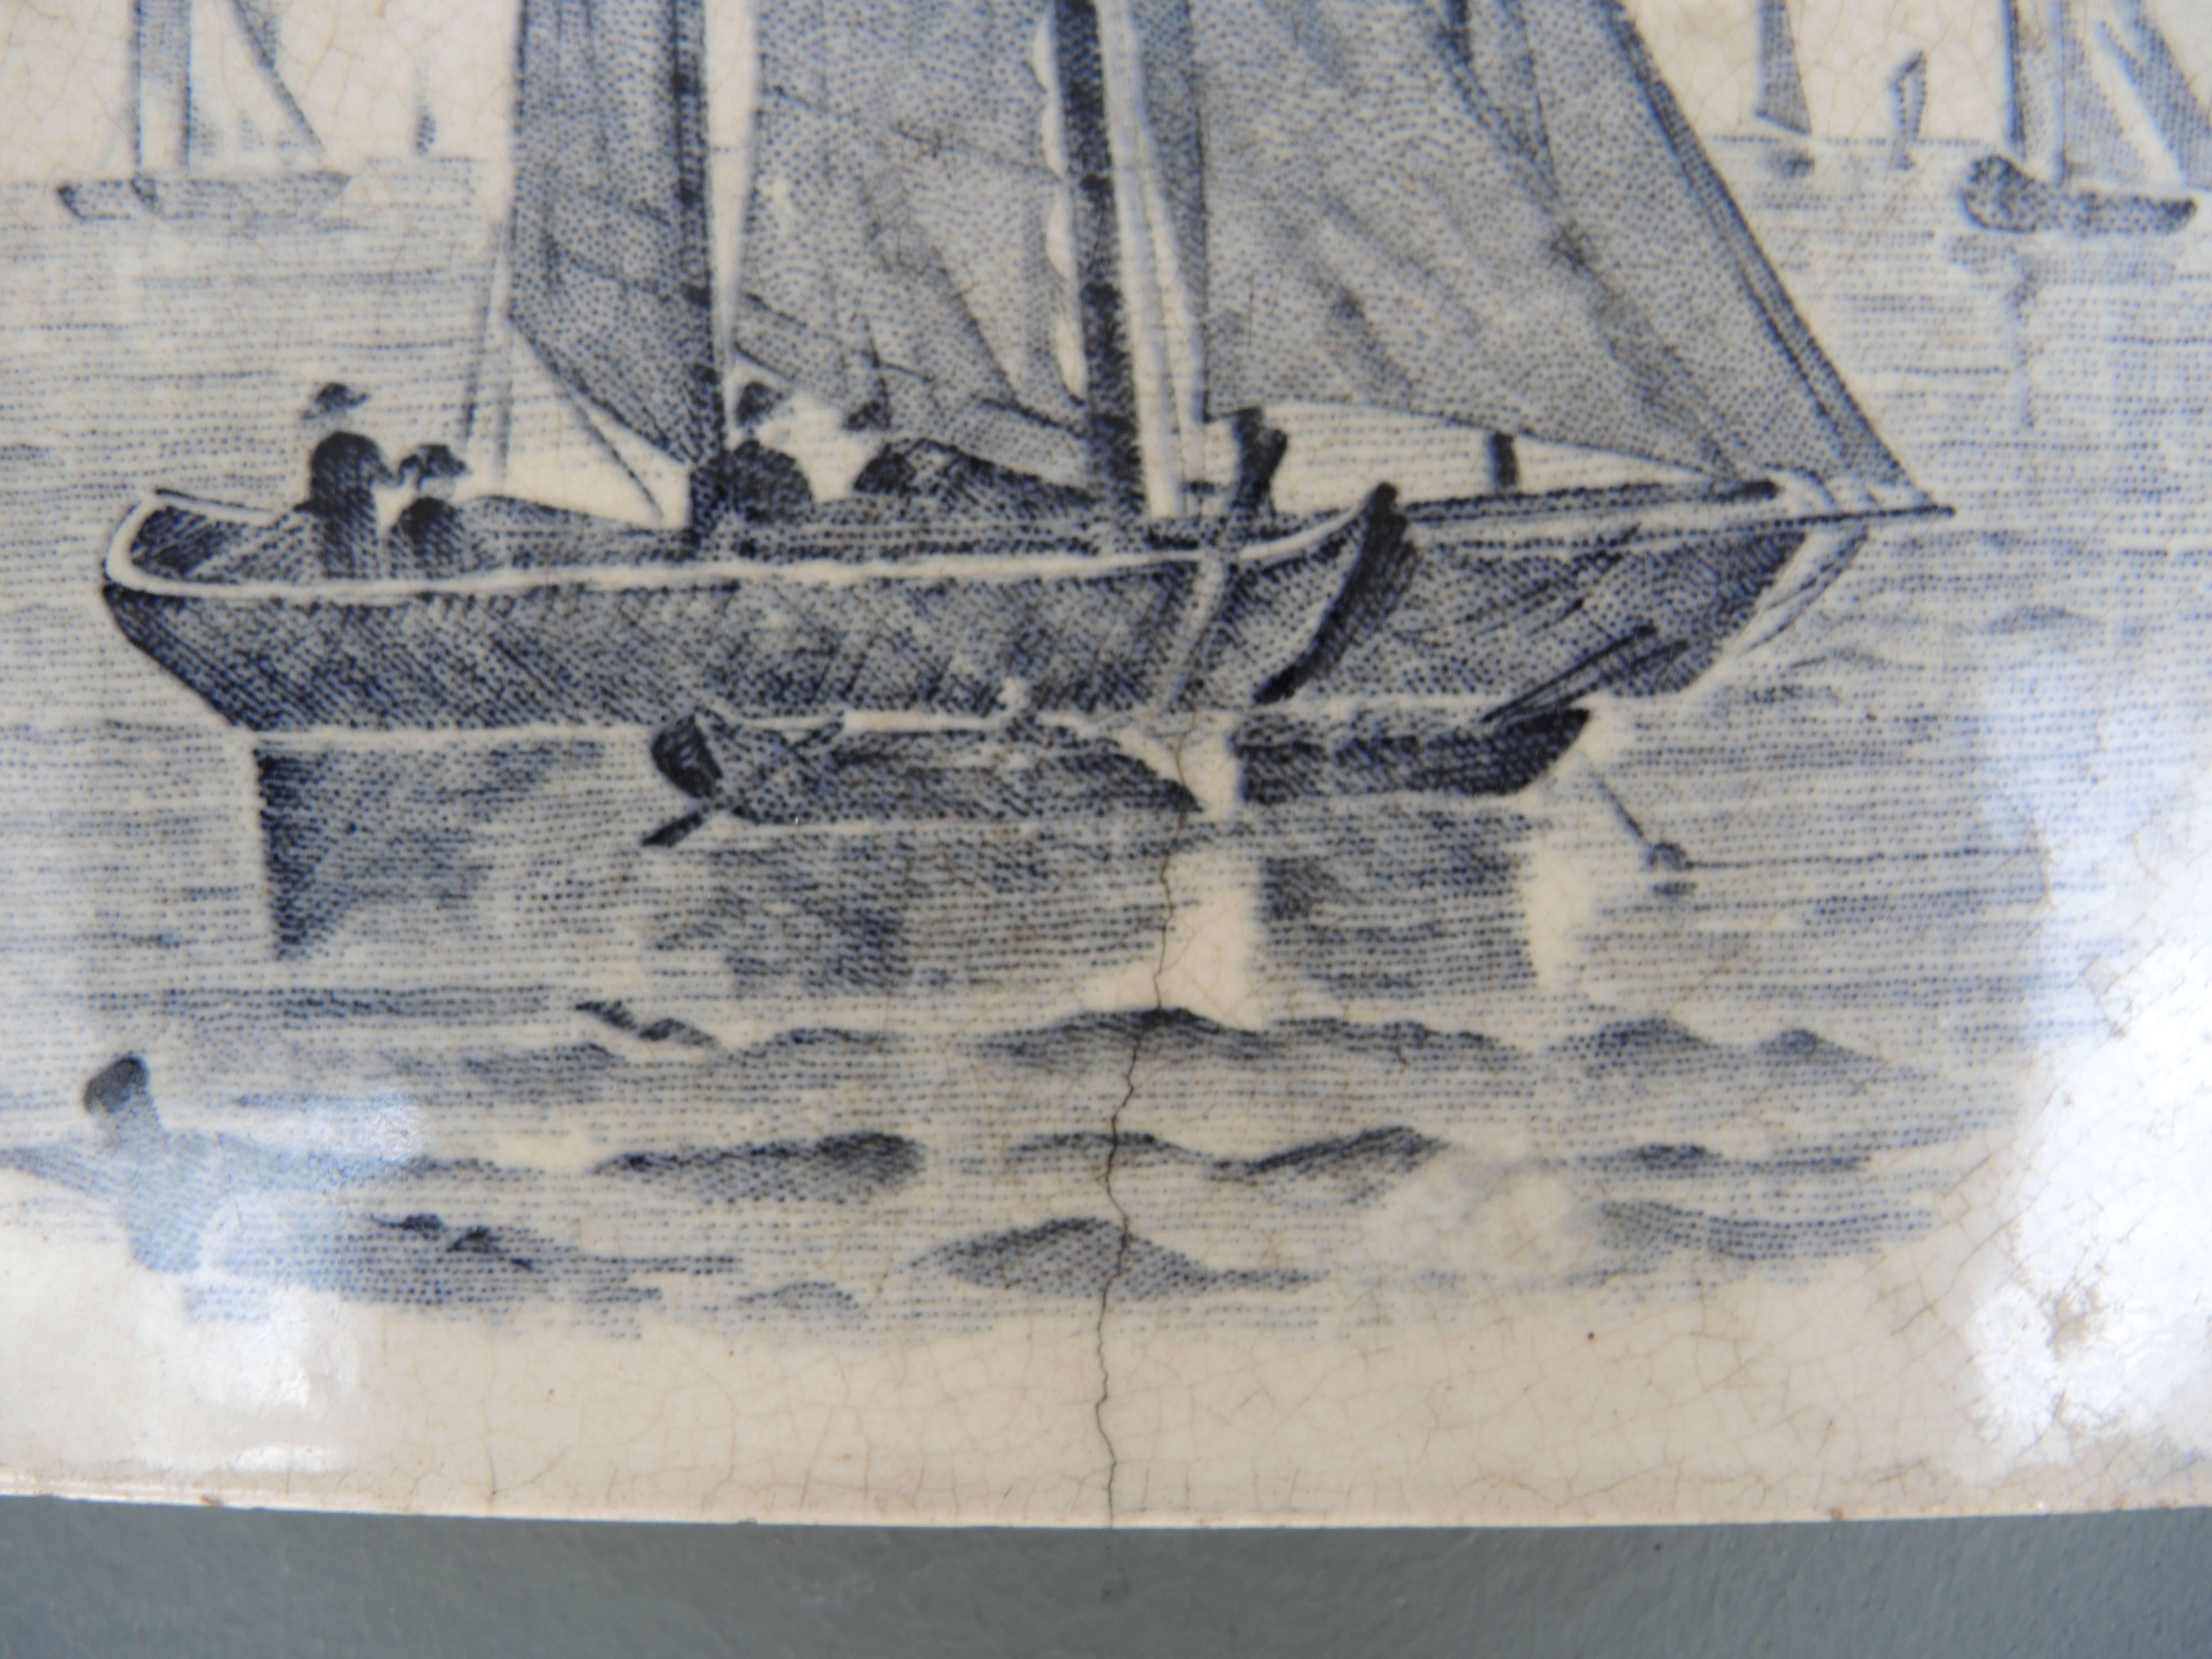 English earthenware glazed tile serving trivet (used to protect the table from hot serving dishes) in creamy white and greyish blue depicting a summer sailing scene.